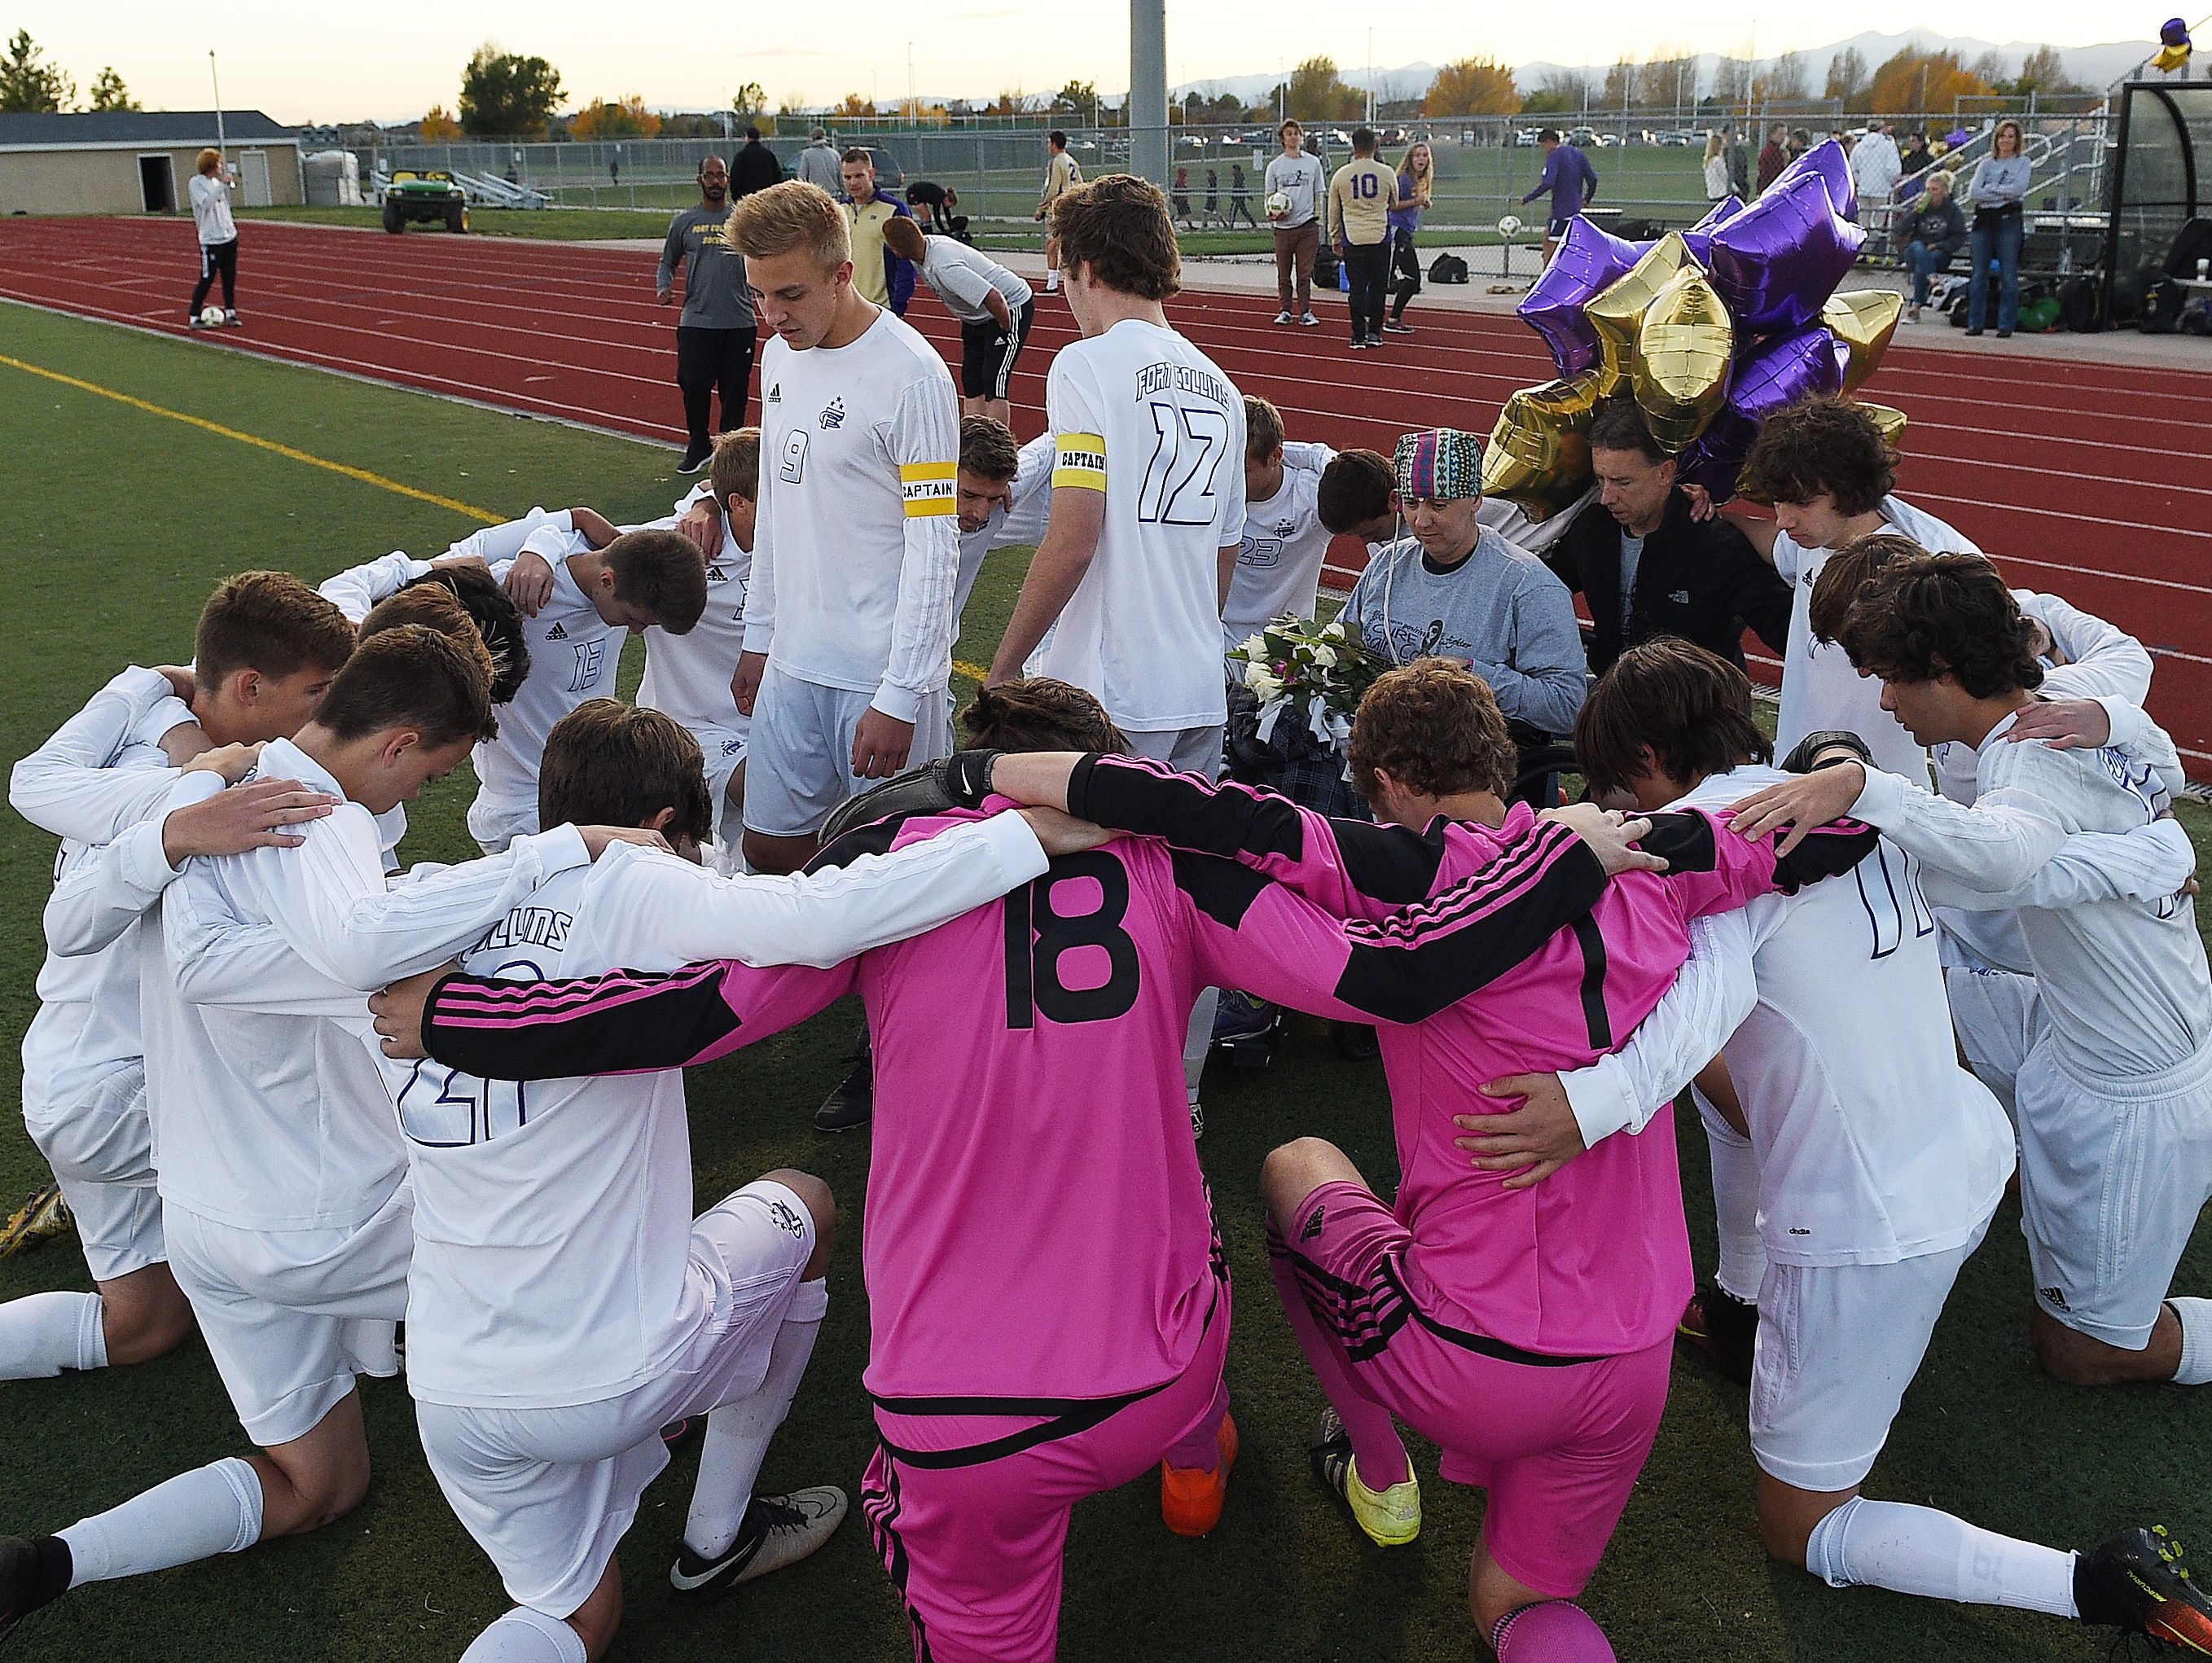 Team captains Derrick Eberling and Matthew Rhoads lead a prayer with honorary captain Heather Keaten before a Fort Collins High School soccer game on Thursday, October 20, 2016. Keaten has stage IV brain cancer and the team sold t-shirts and collected donations at the game to raise money for her care.